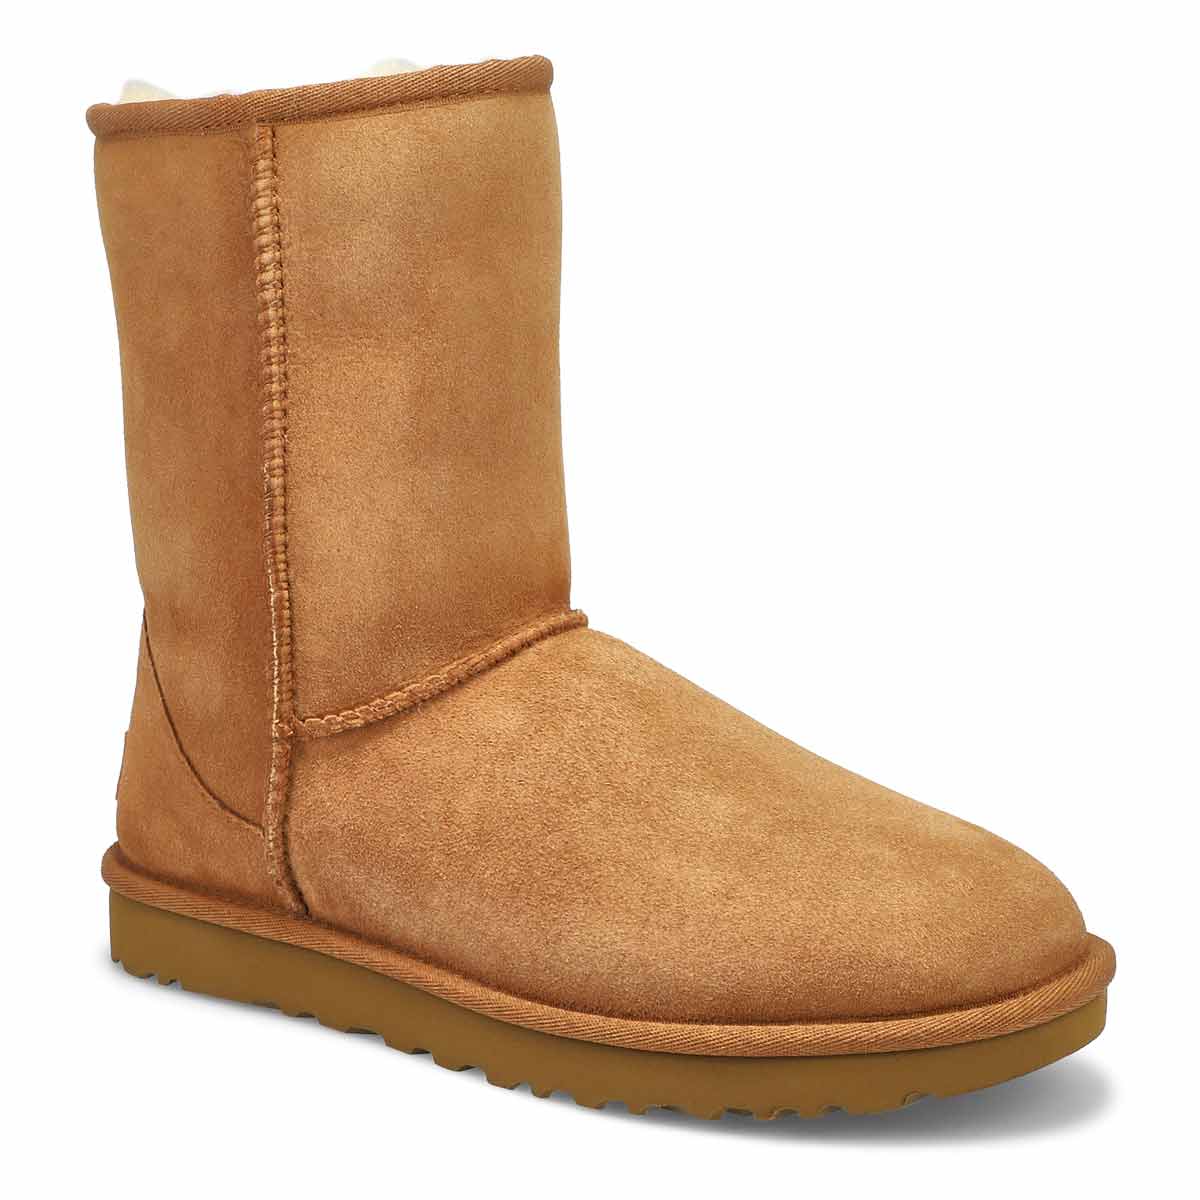 where can i buy uggs for cheap